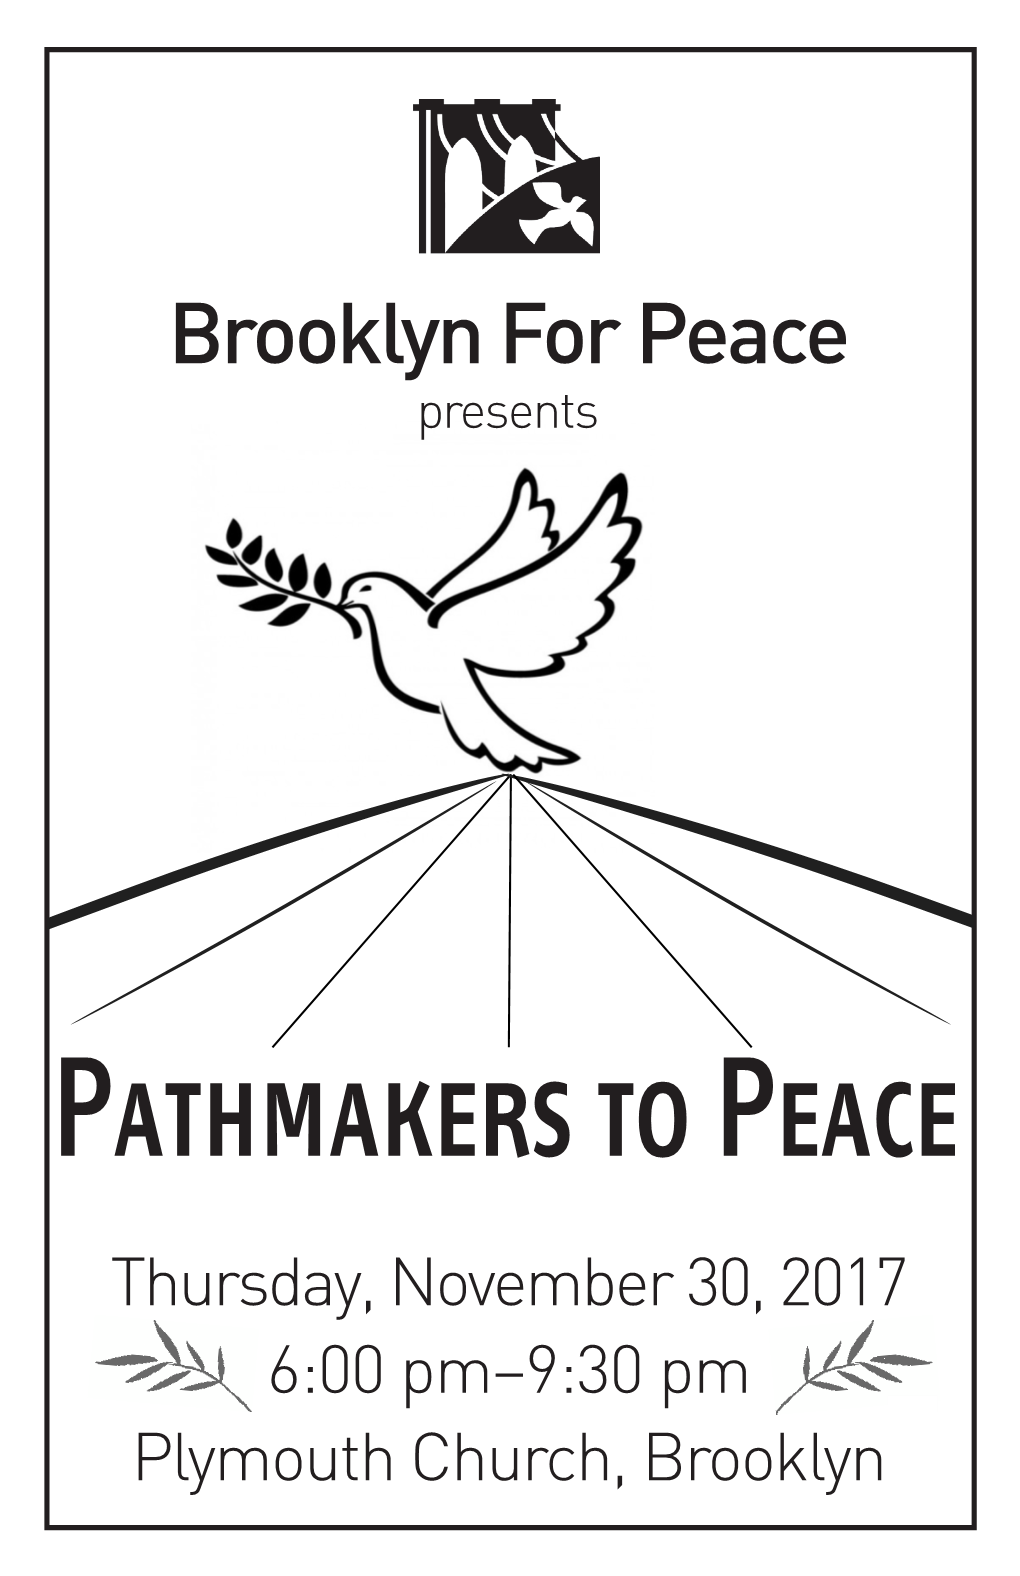 Pathmakers to Peace